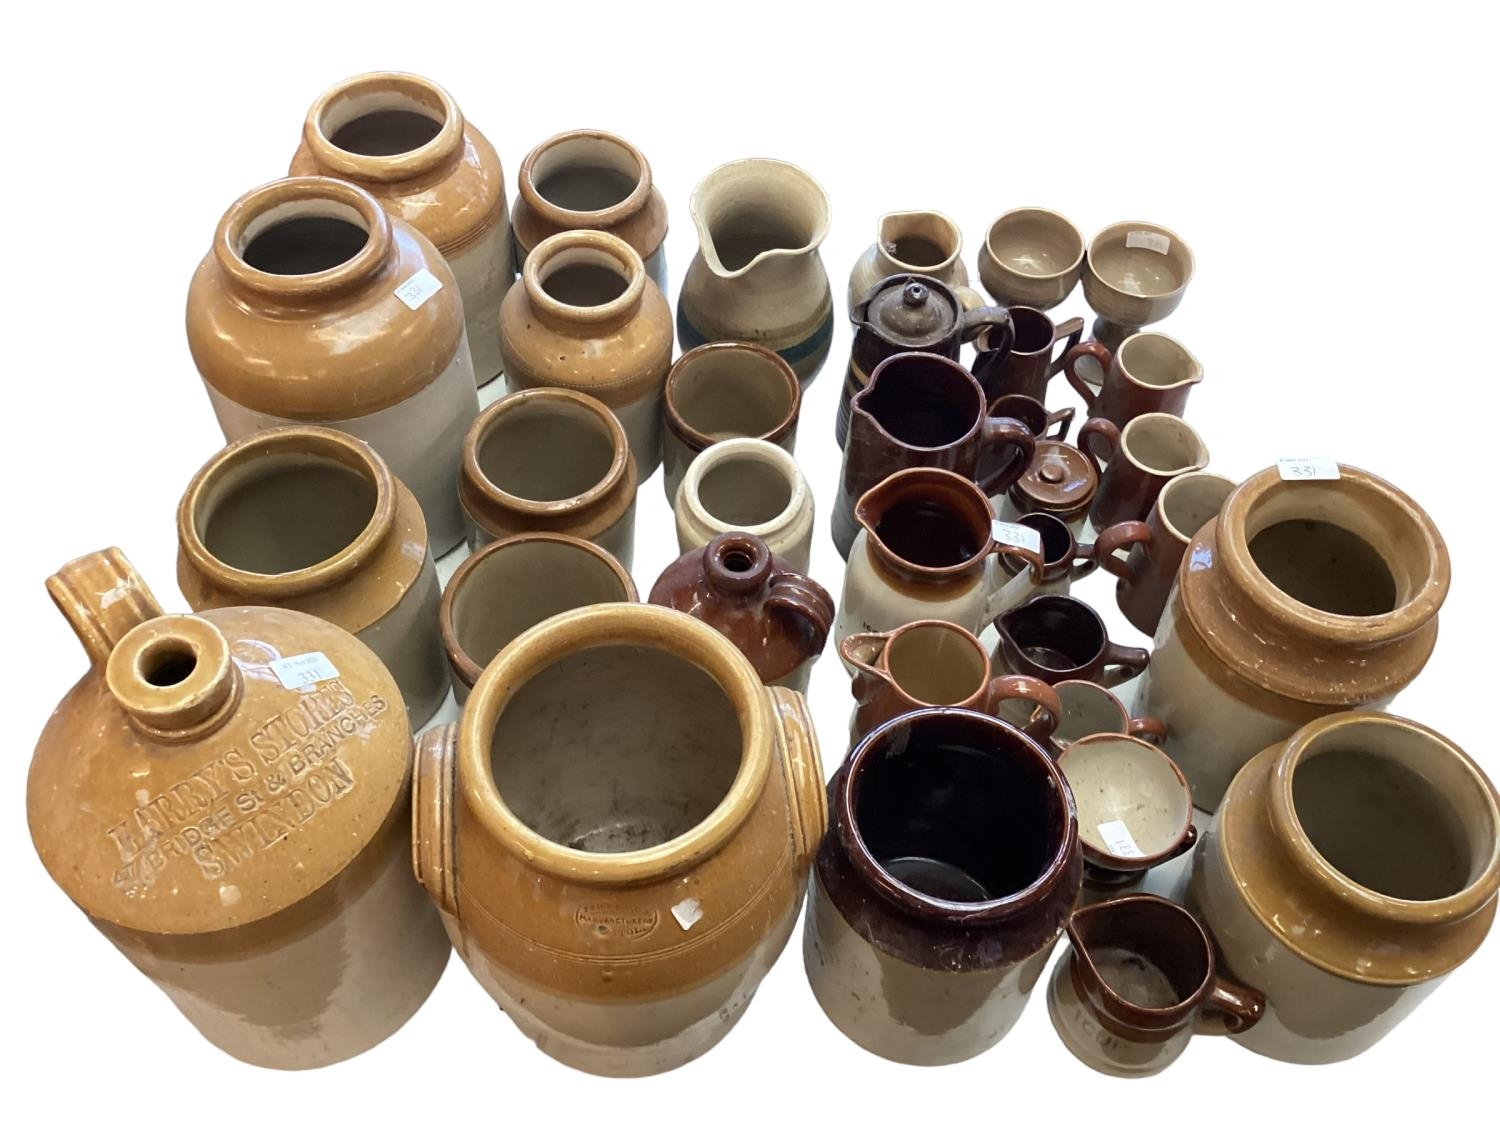 A quantity of brown earthenware pottery jugs and pots and flaggons, all as found